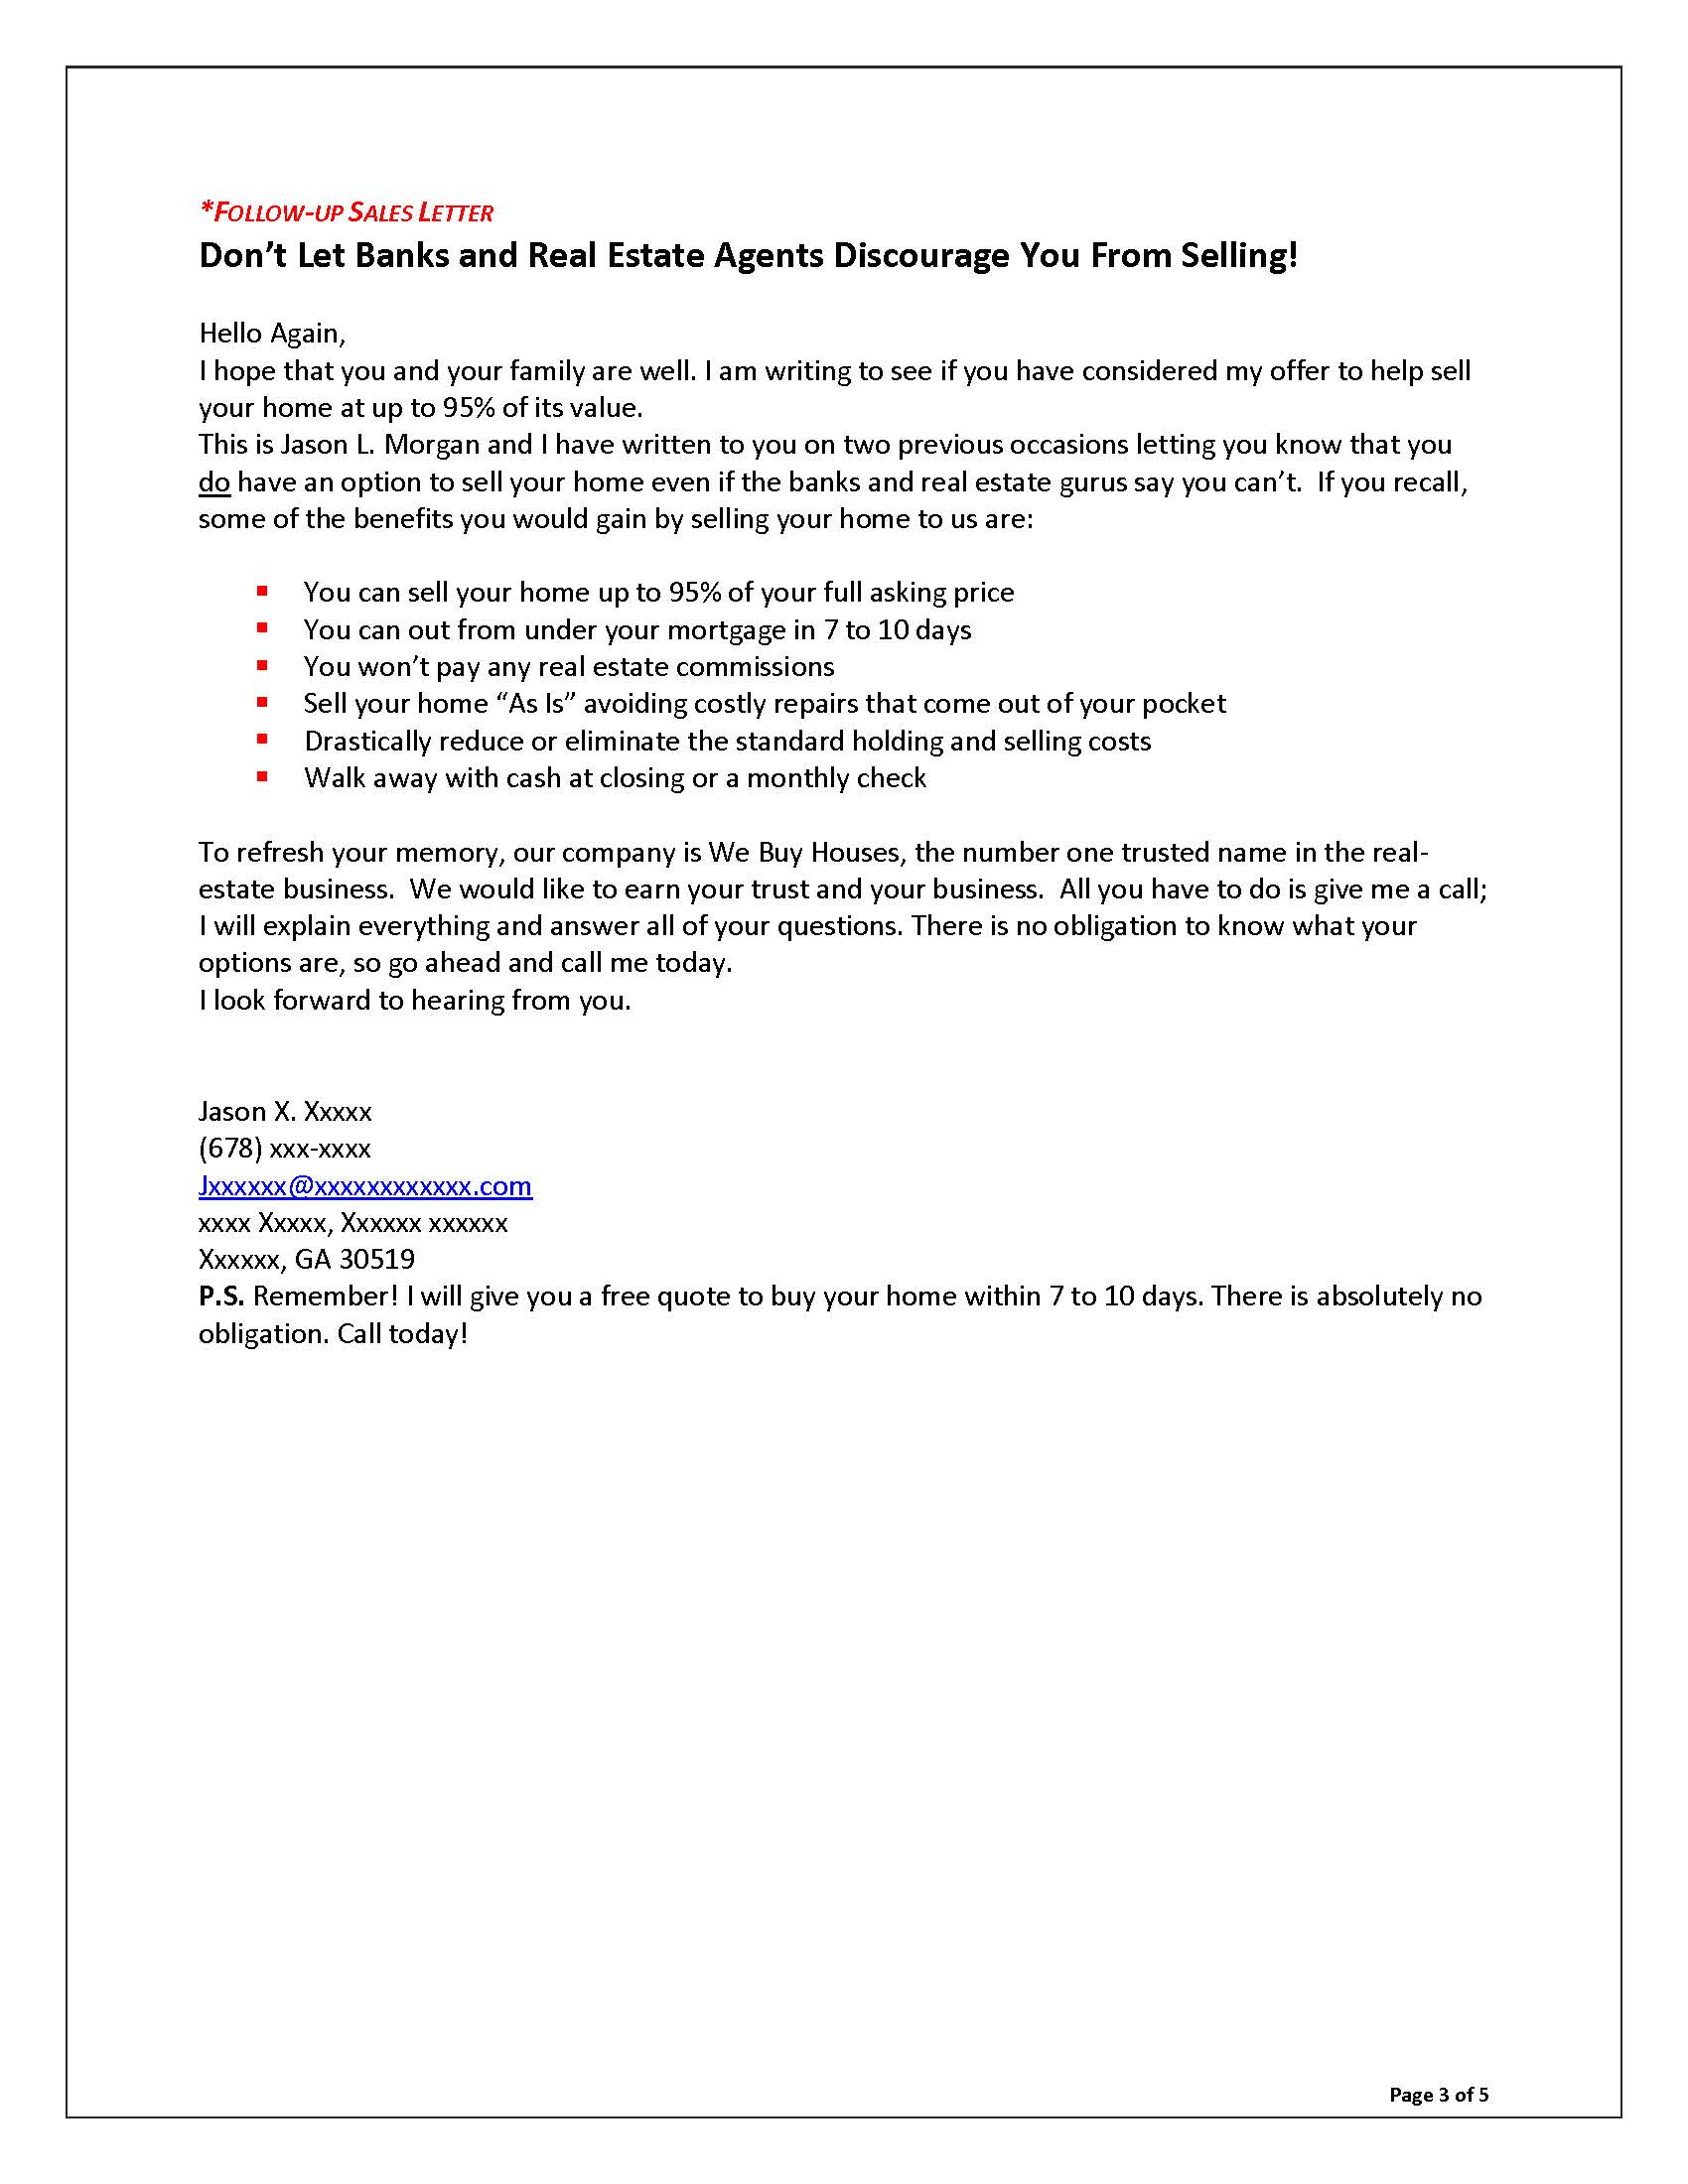 Sales Letter Series - Real Estate Co._Page_3